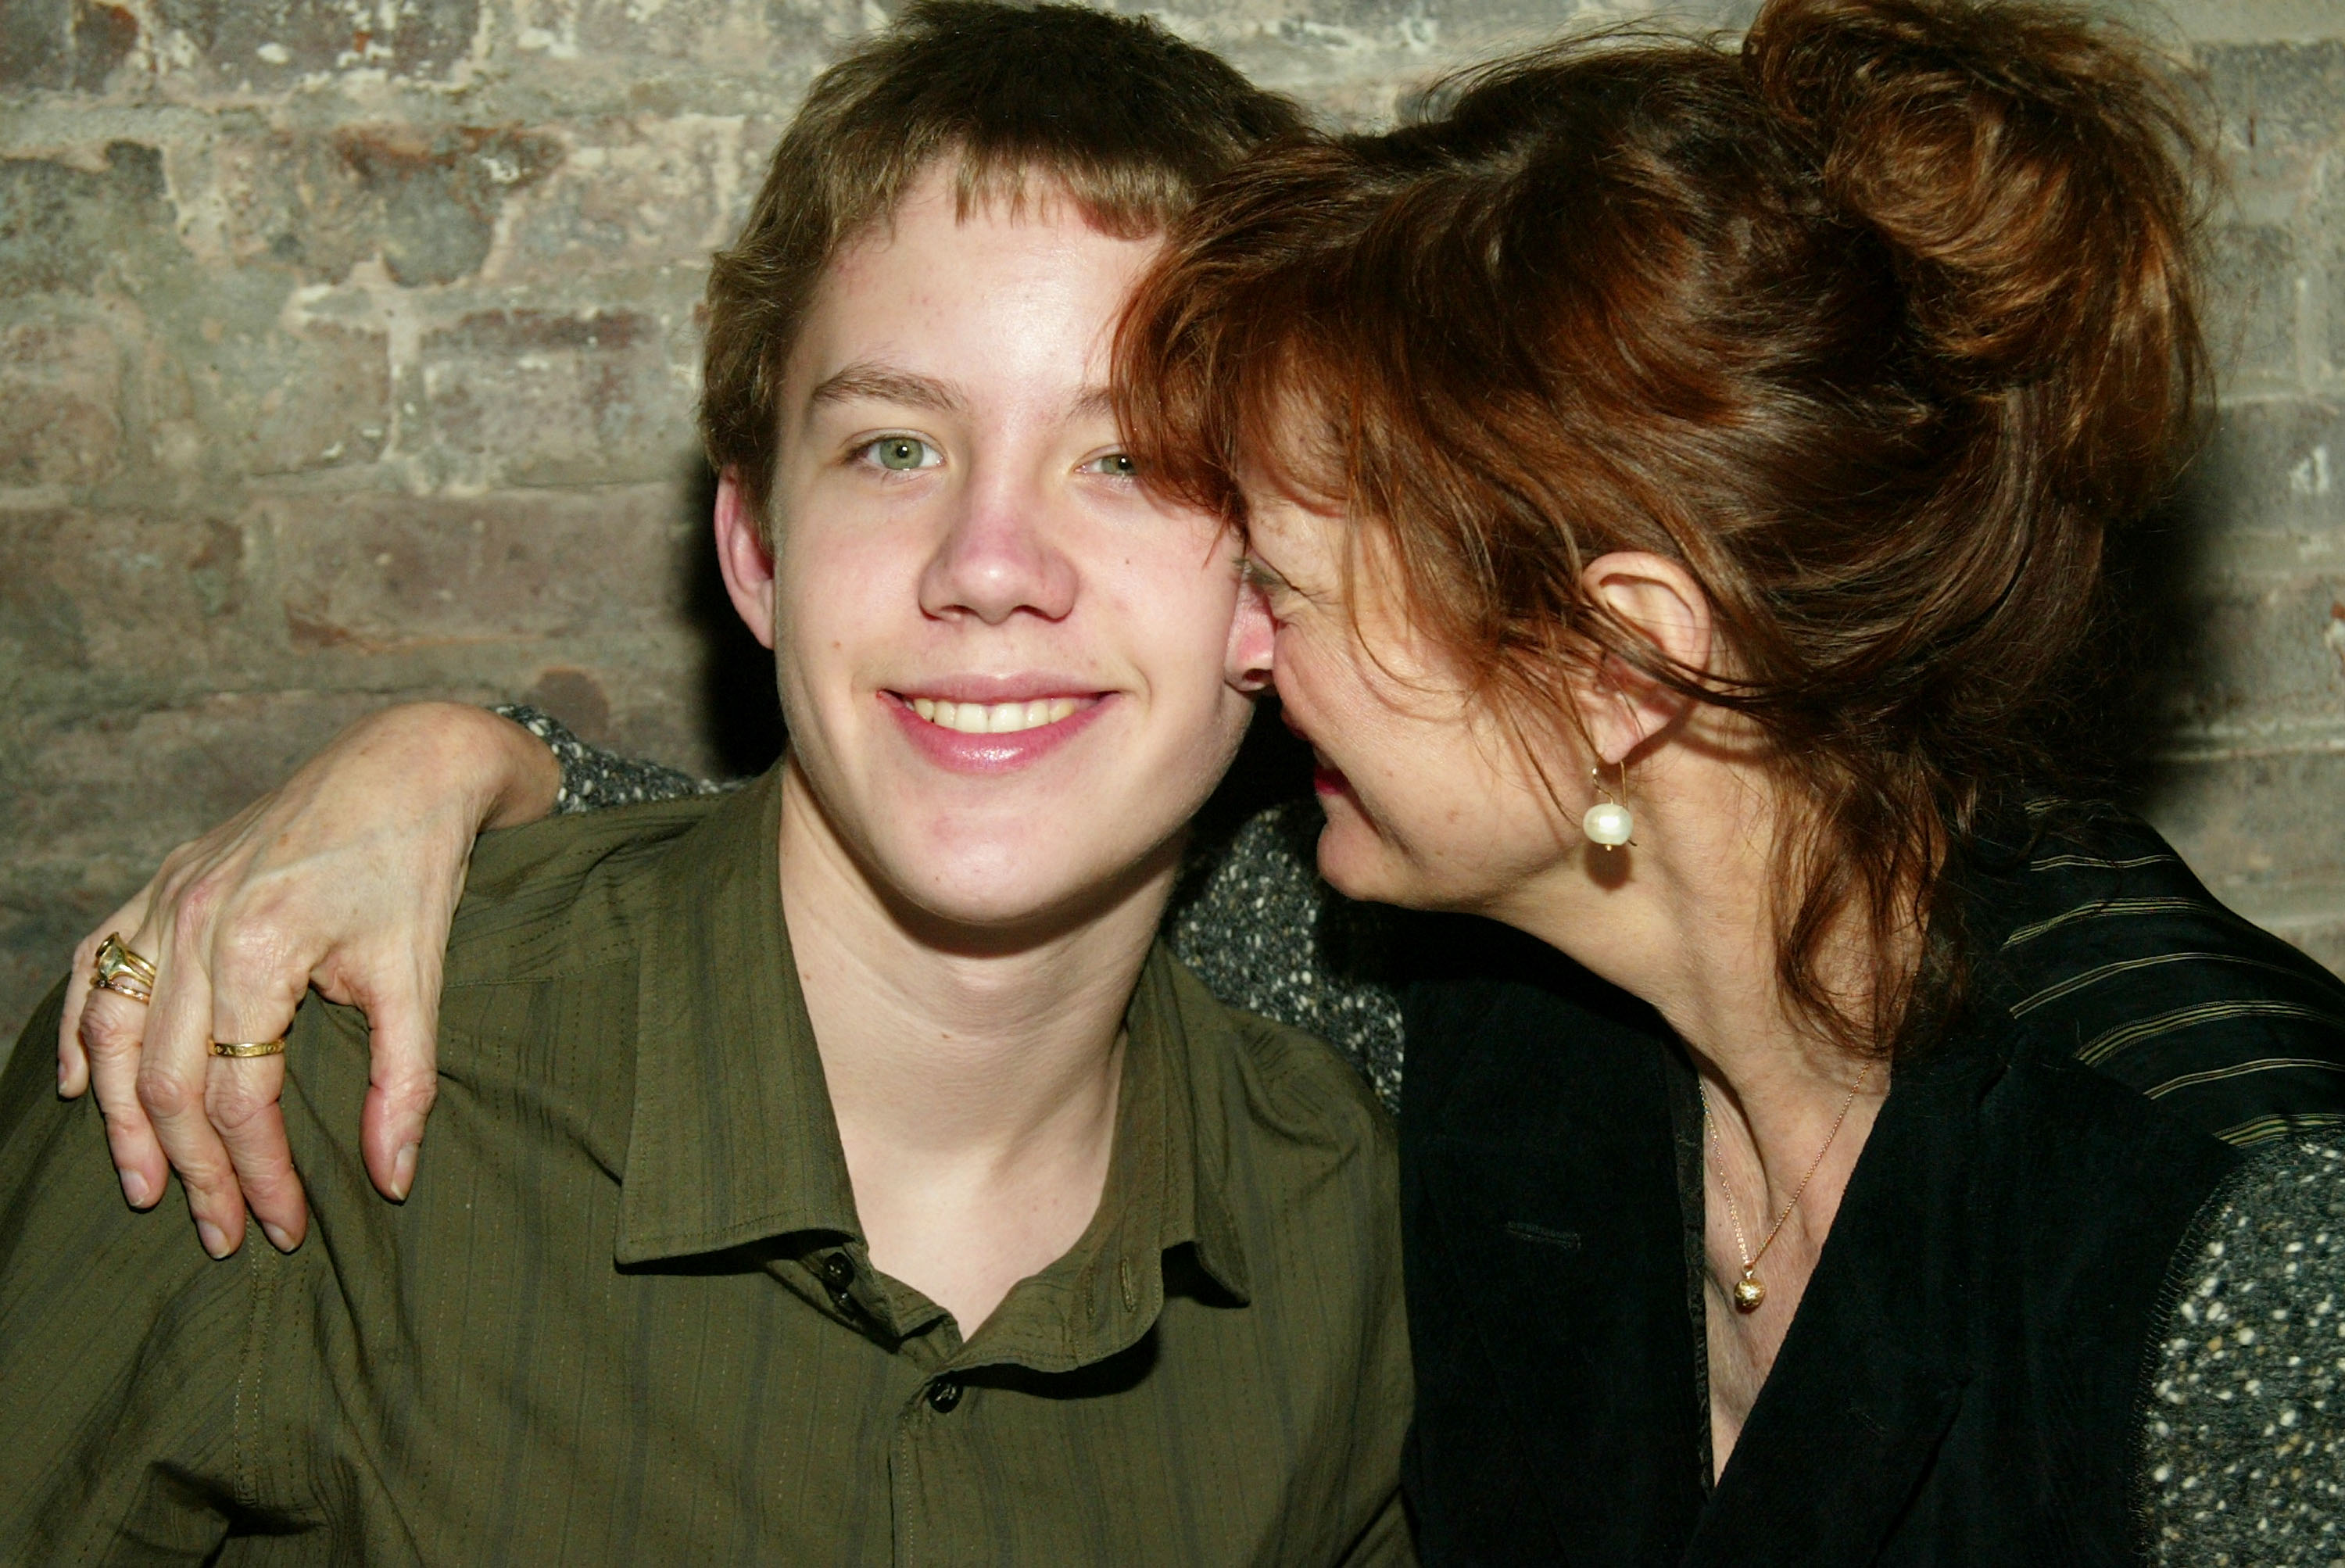 Jack Henry Robbins and Susan Sarandon at the opening night of "Embedded" in New York City on March 14, 2004 | Source: Getty Images